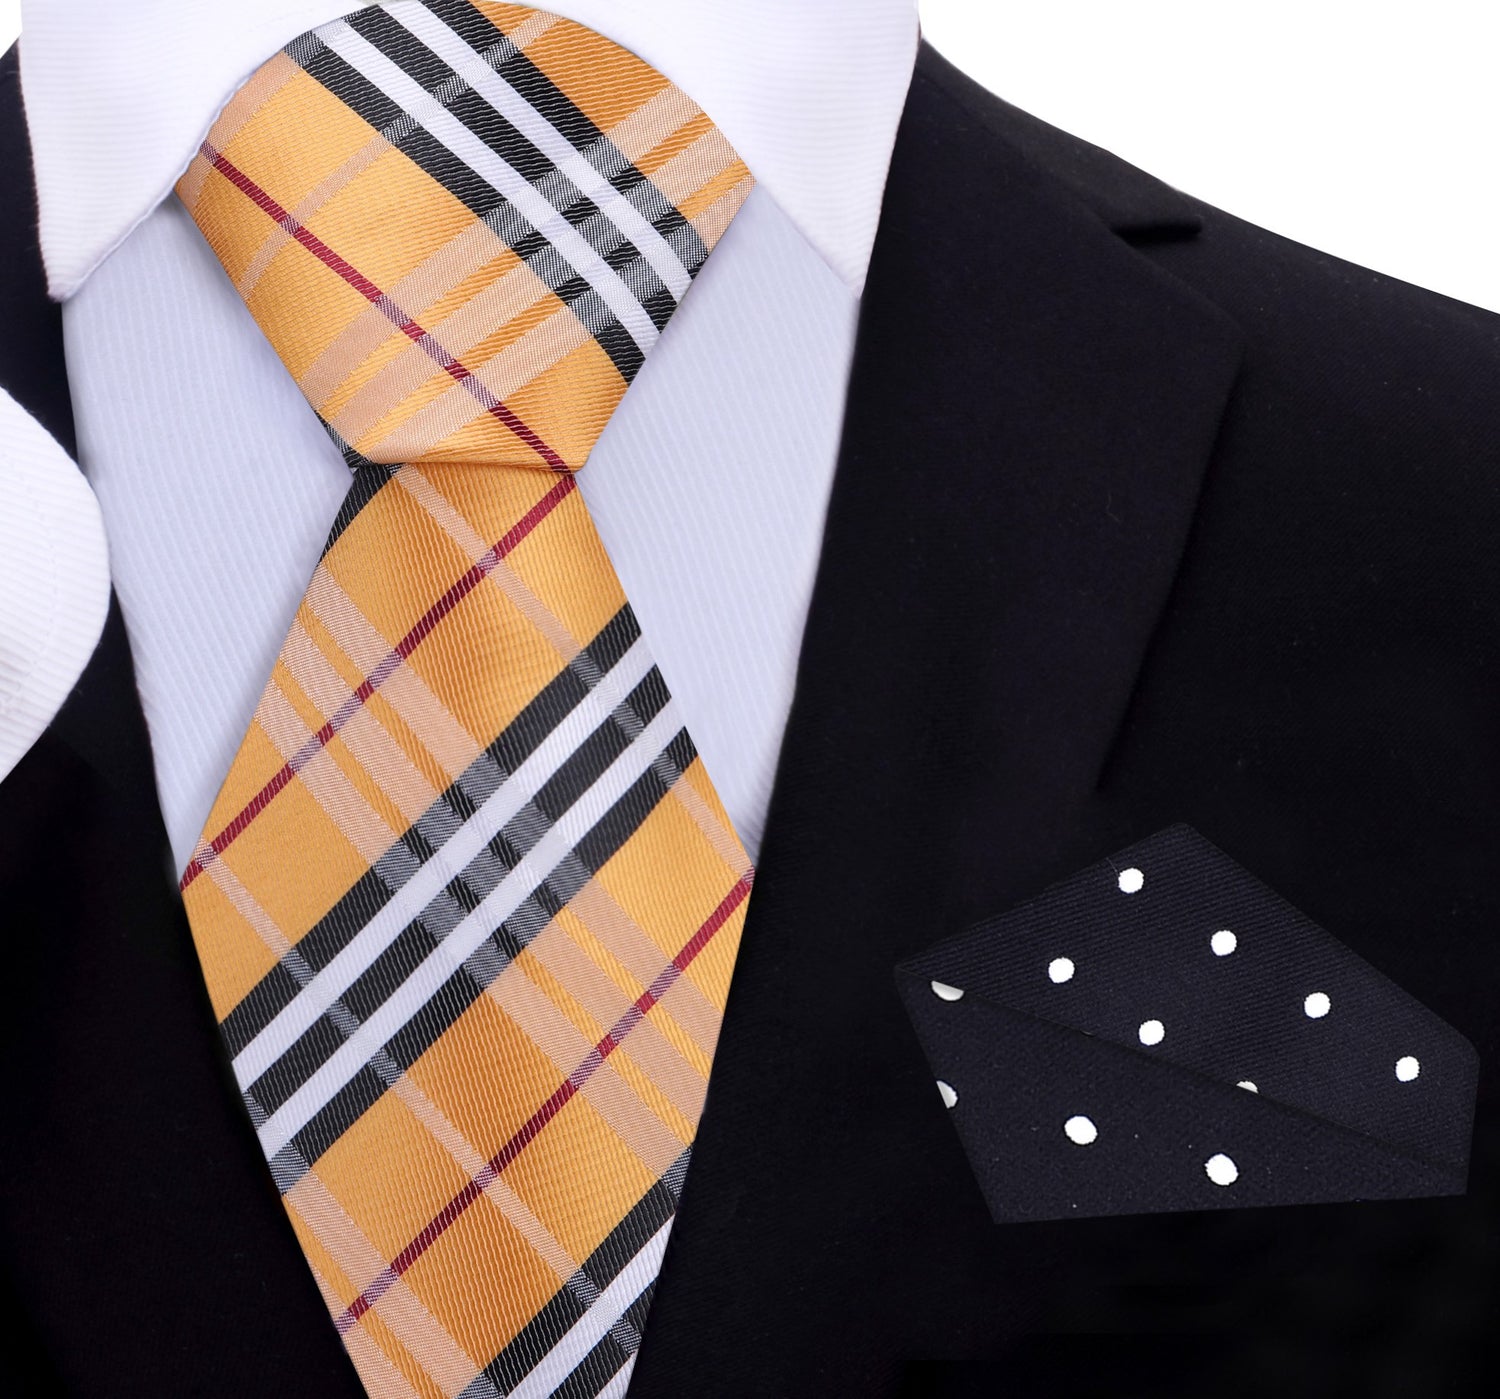 Golden Brown, Black, White, Red Plaid Tie and Black with White Dots Square